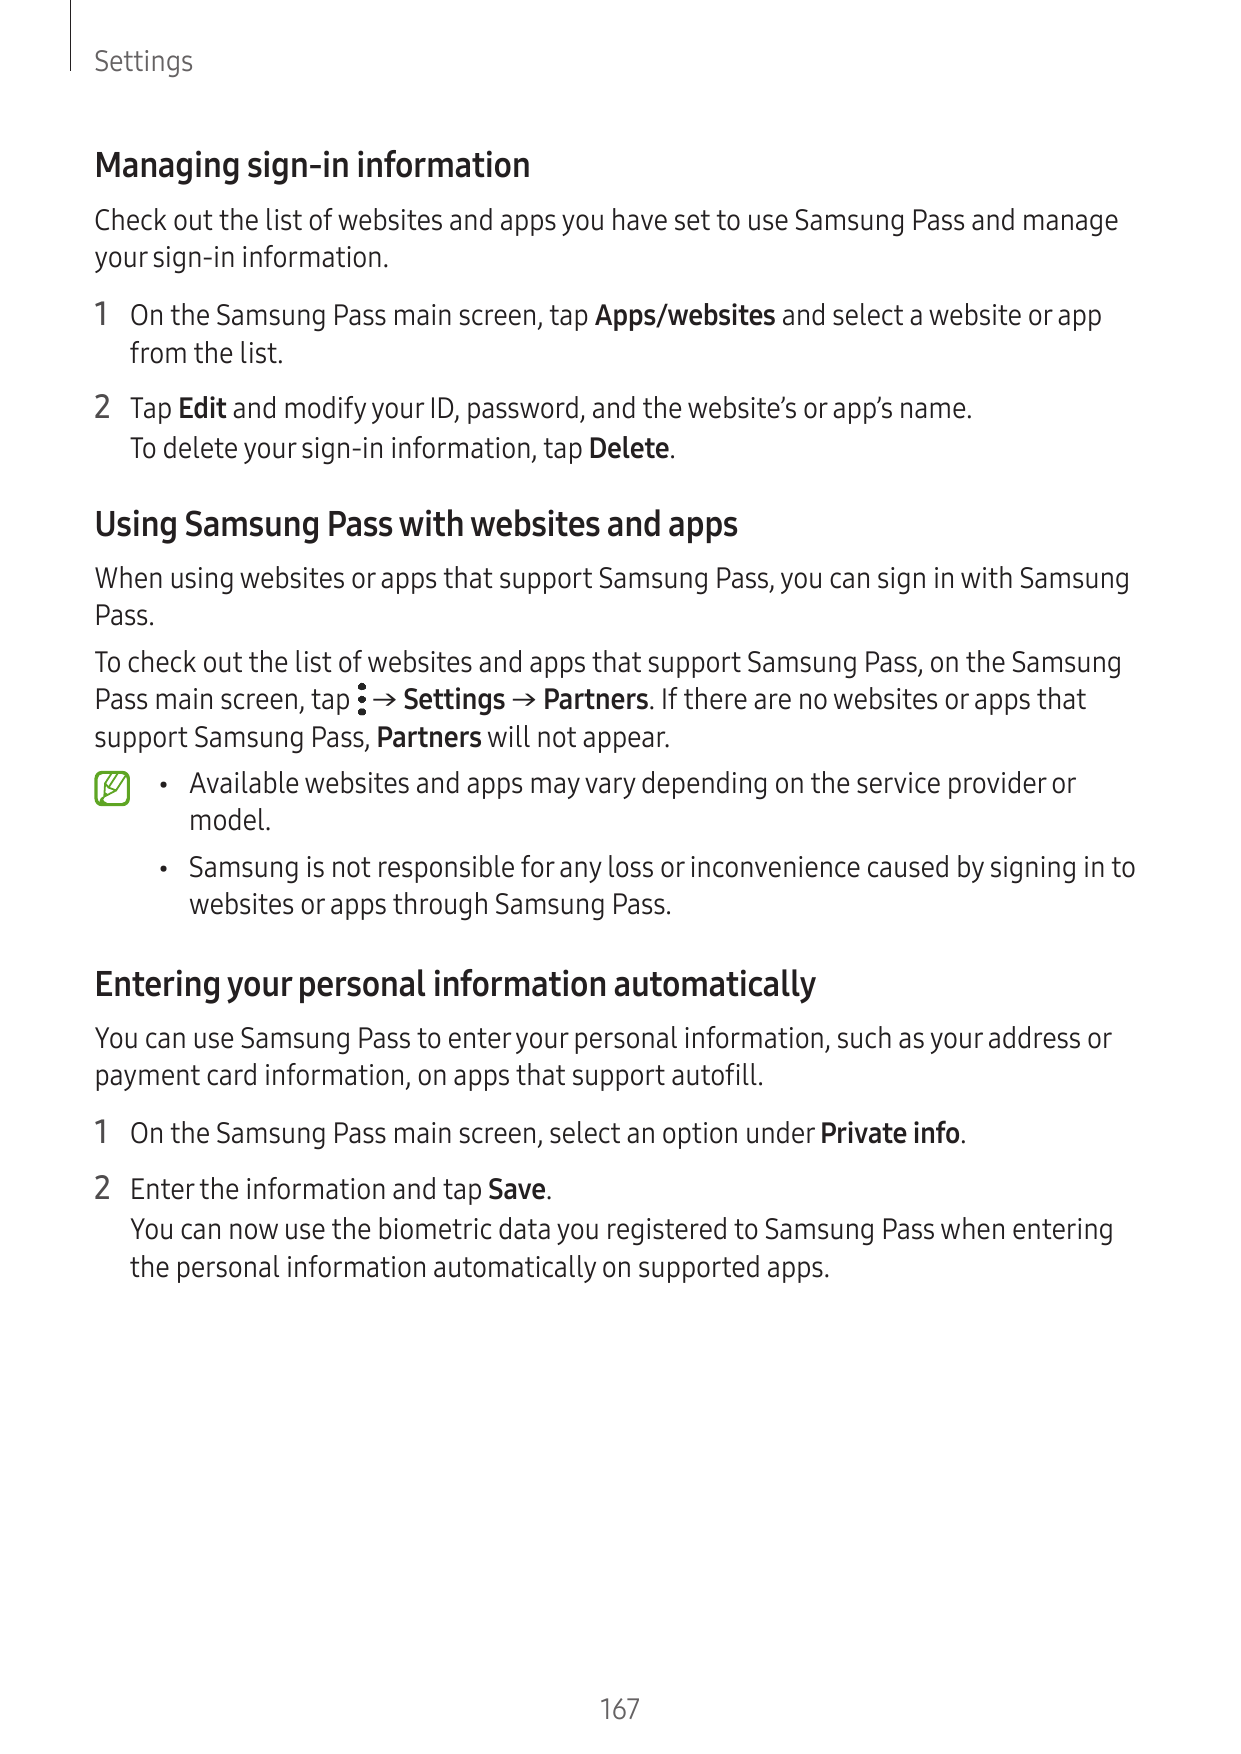 SettingsManaging sign-in informationCheck out the list of websites and apps you have set to use Samsung Pass and manageyour sign